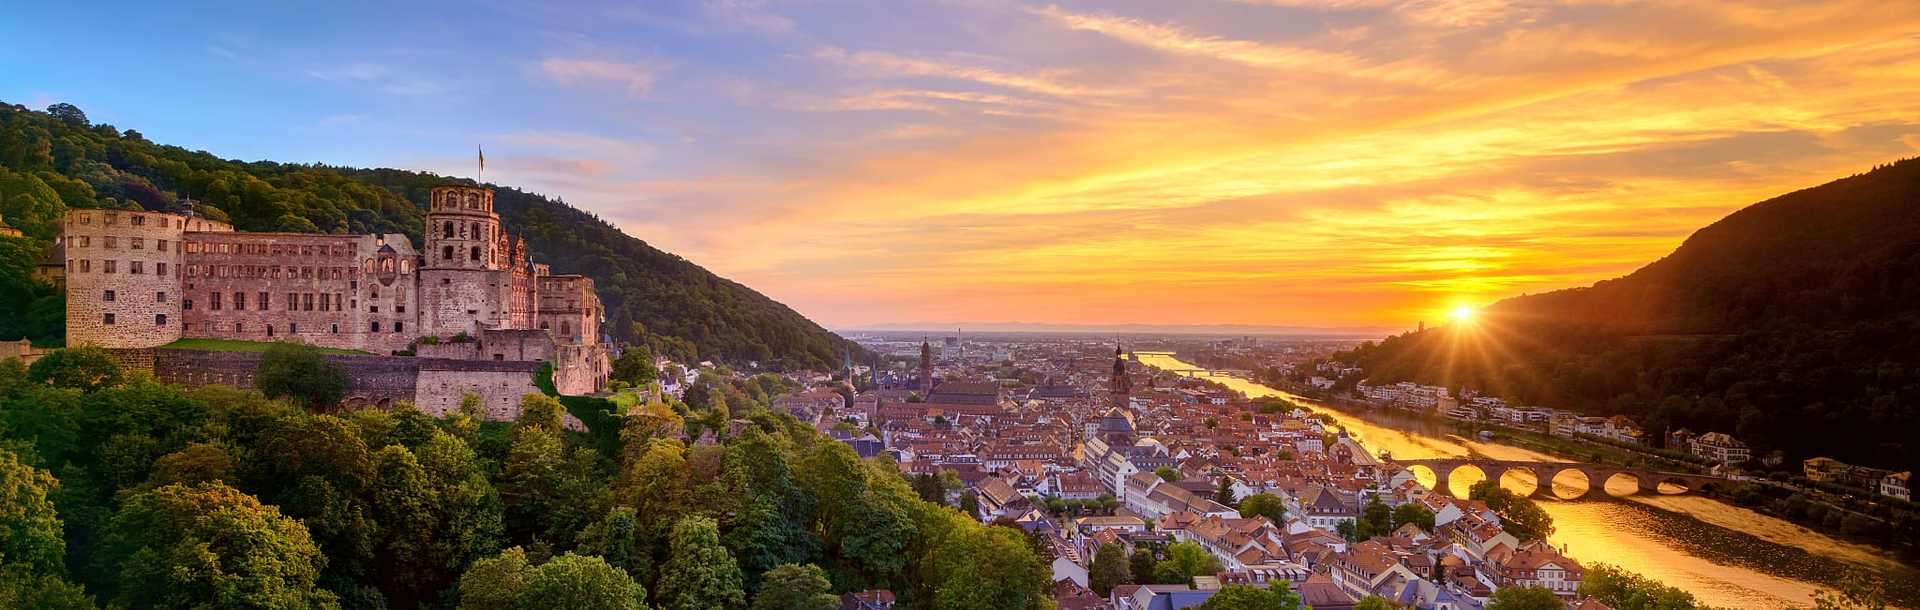 Schloss Heidelberg on the hill over looking the city and the Neckar River in Germany.